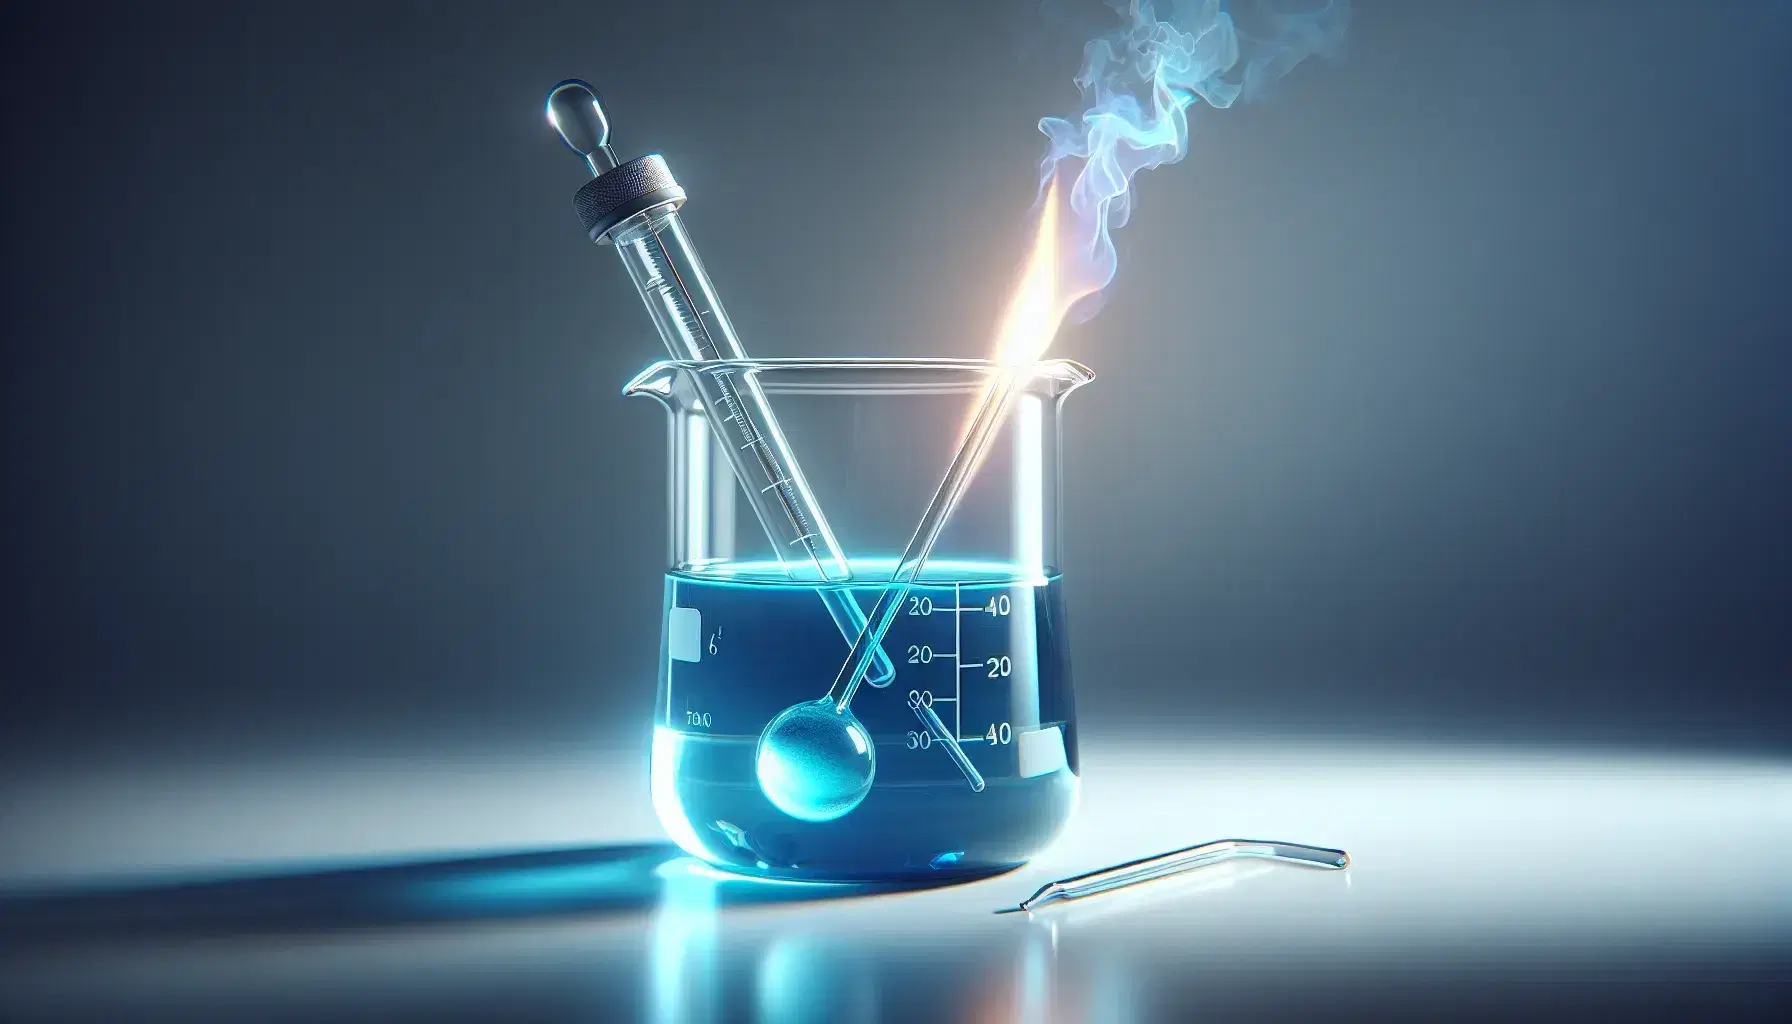 Glass beaker with lit blue liquid on white surface, lit Bunsen burner underneath and immersed thermometer, in laboratory.